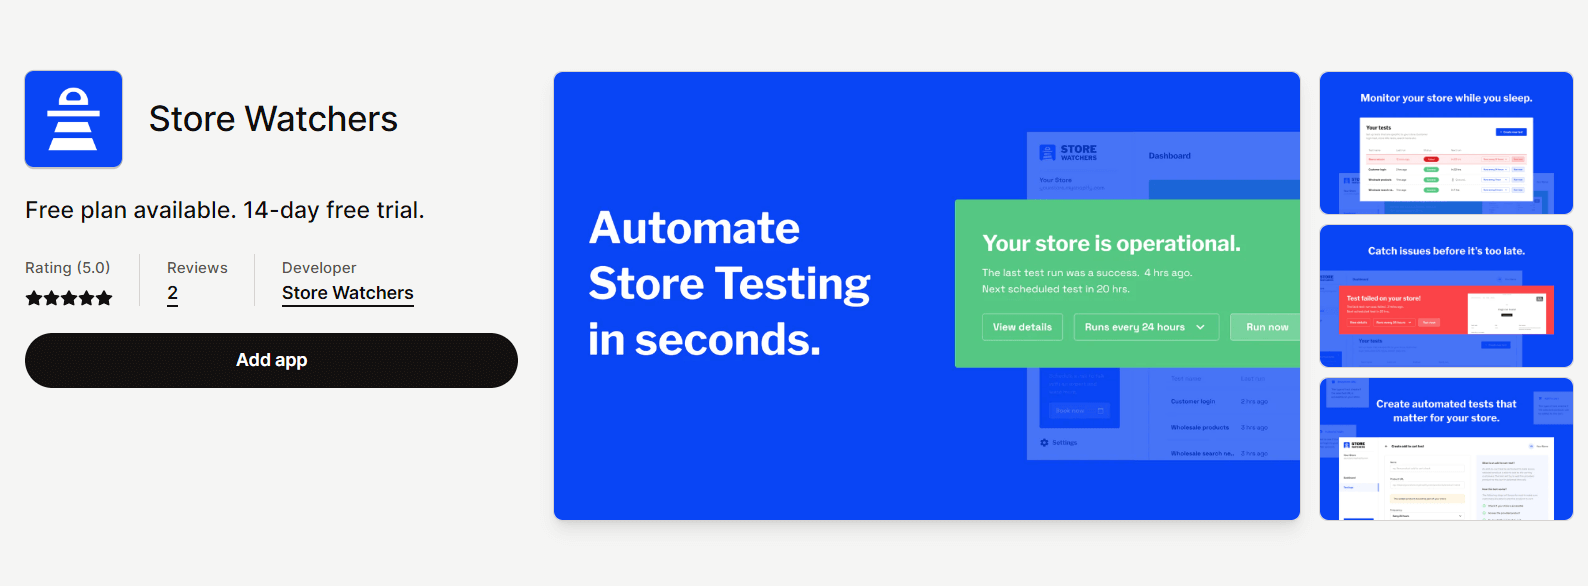 Shopify security tools - Store Watchers